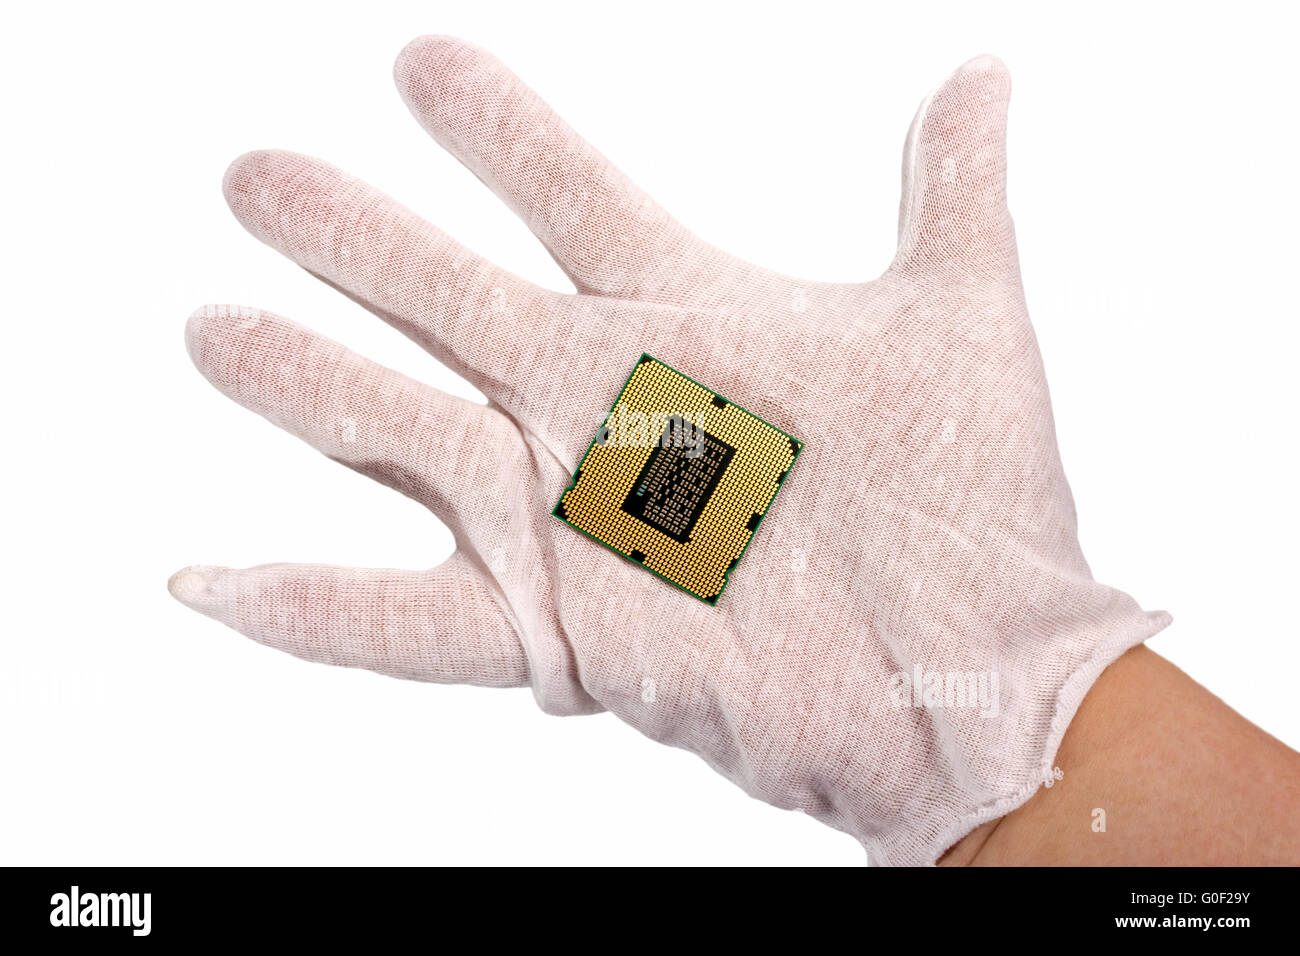 Hand holding a CPU from the bottom side isolated Stock Photo